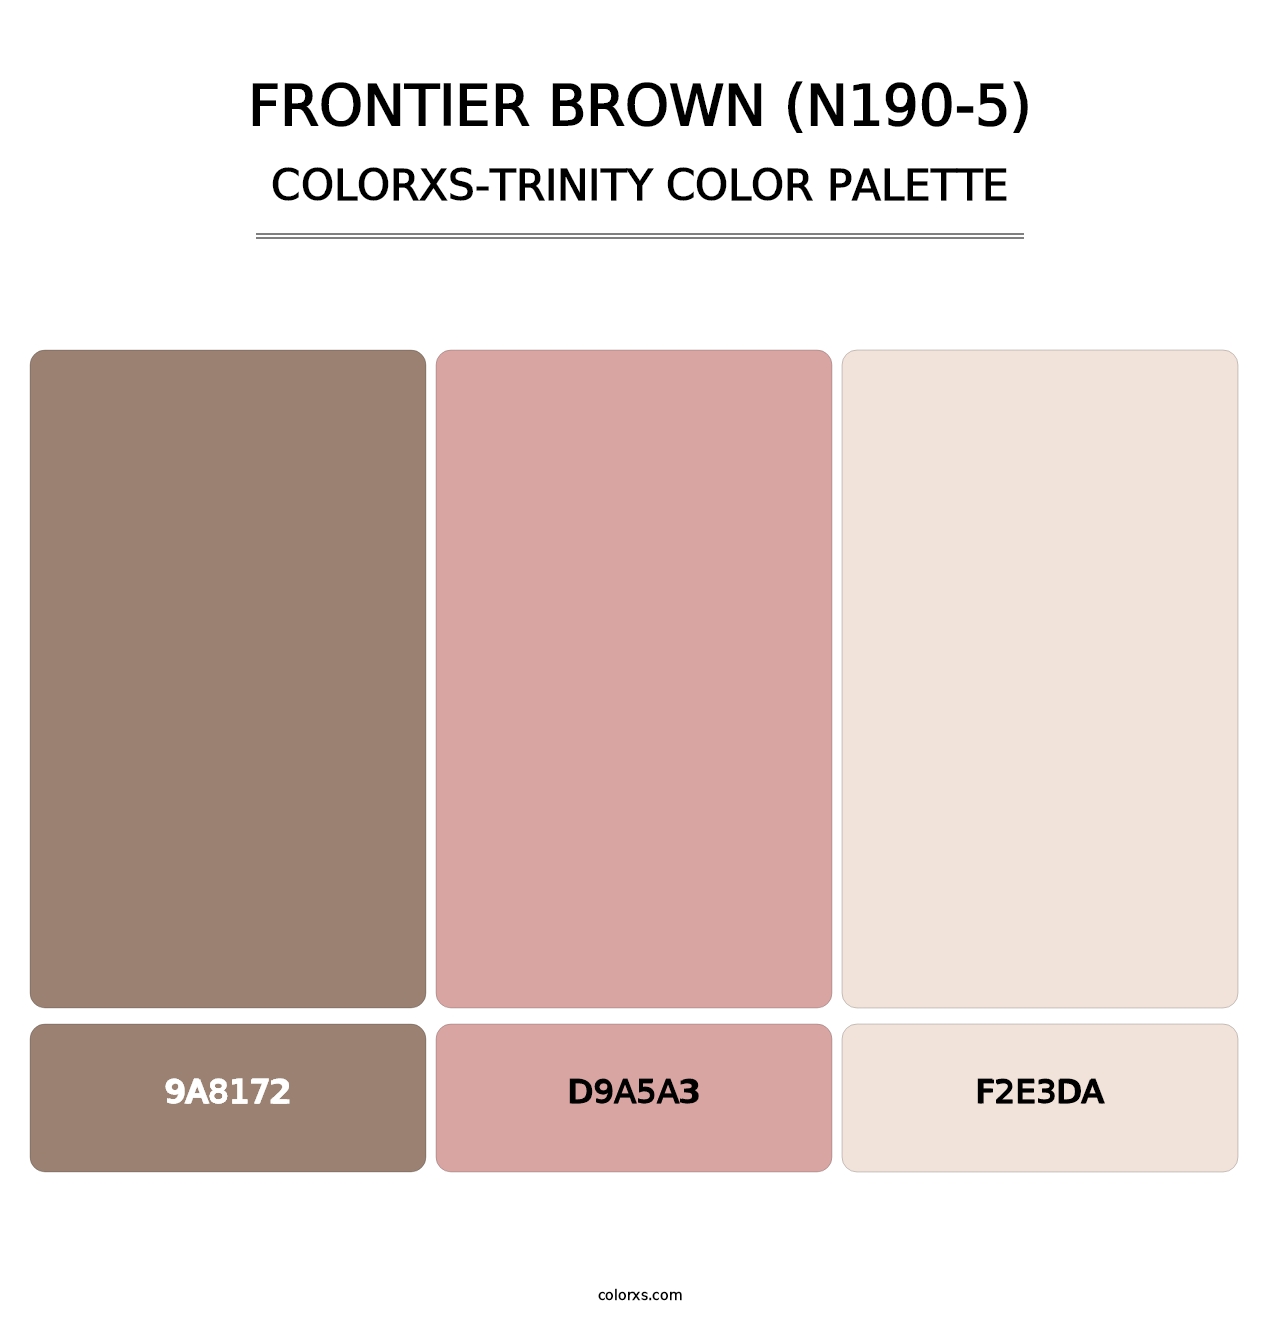 Frontier Brown (N190-5) - Colorxs Trinity Palette